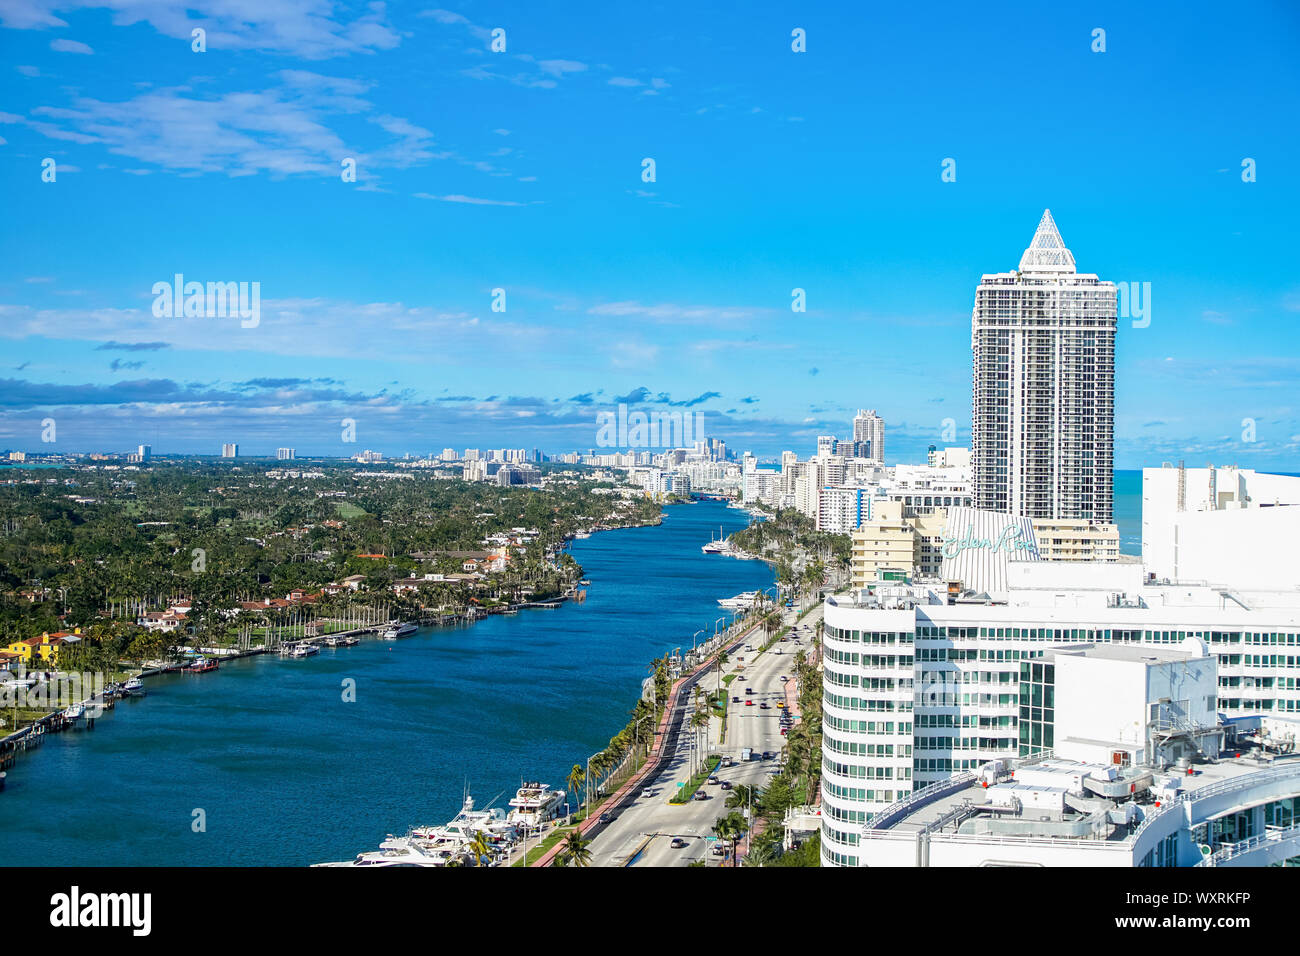 Miami, Florida - January 3, 2018: Arial view from the iconic Fontainebleau hotel. Stock Photo